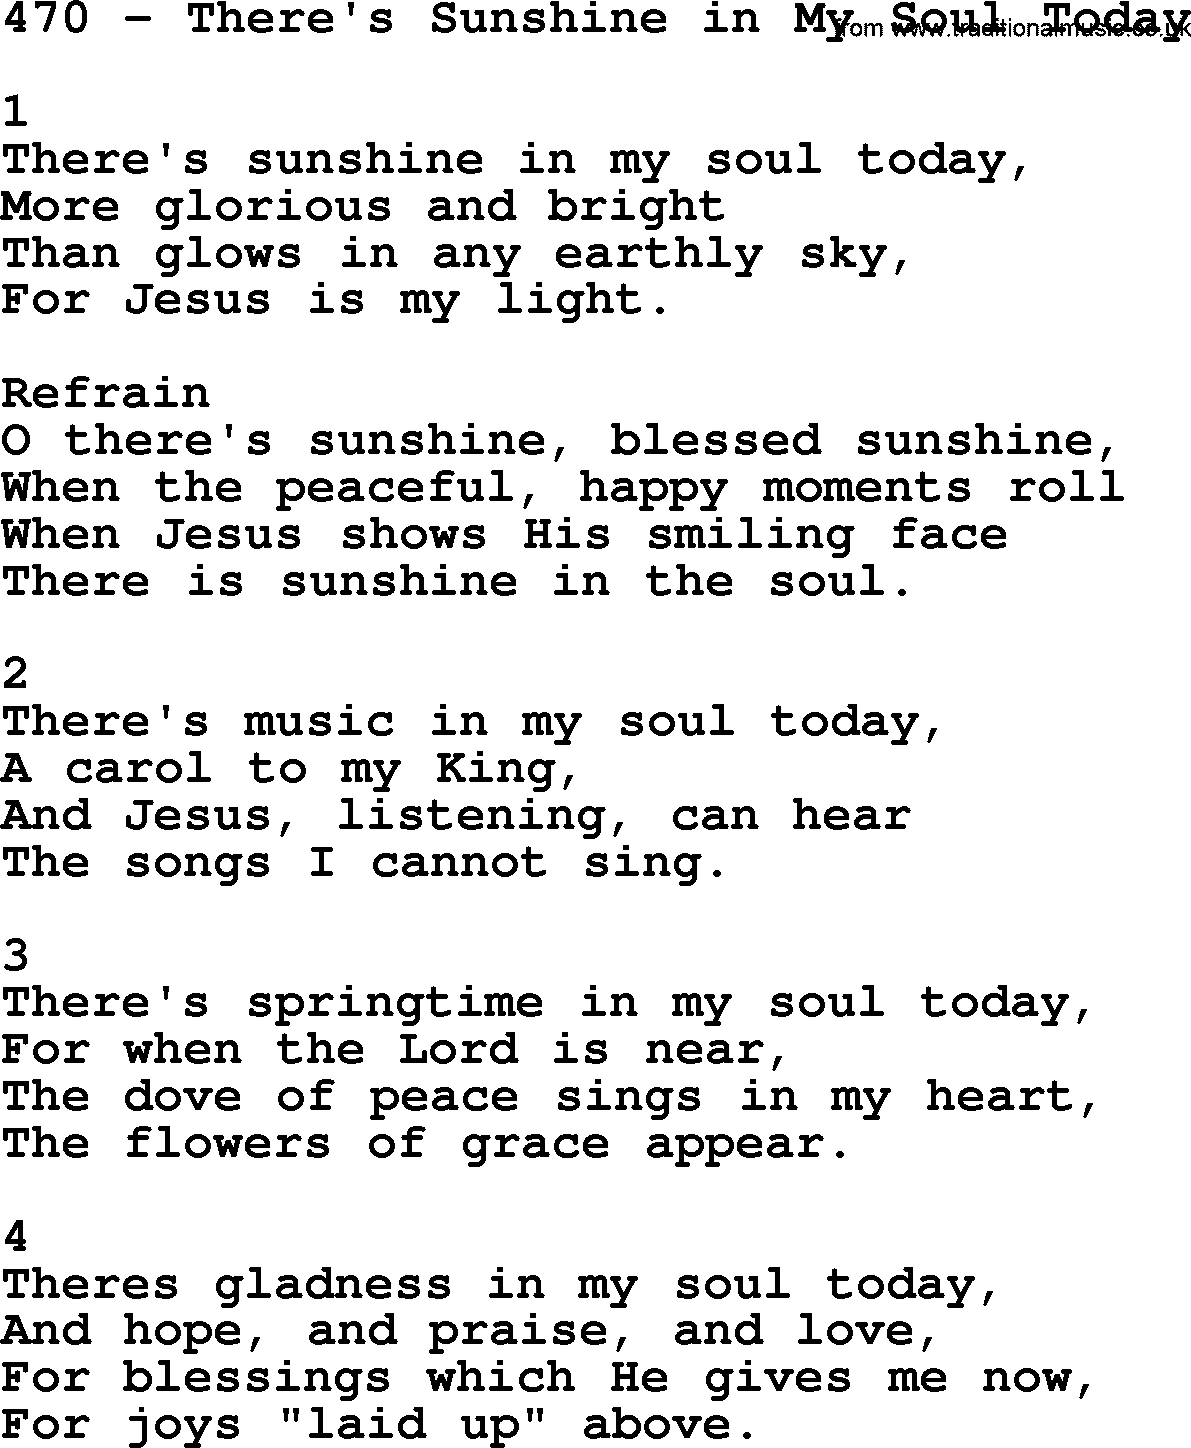 Complete Adventis Hymnal, title: 470-There's Sunshine In My Soul Today, with lyrics, midi, mp3, powerpoints(PPT) and PDF,